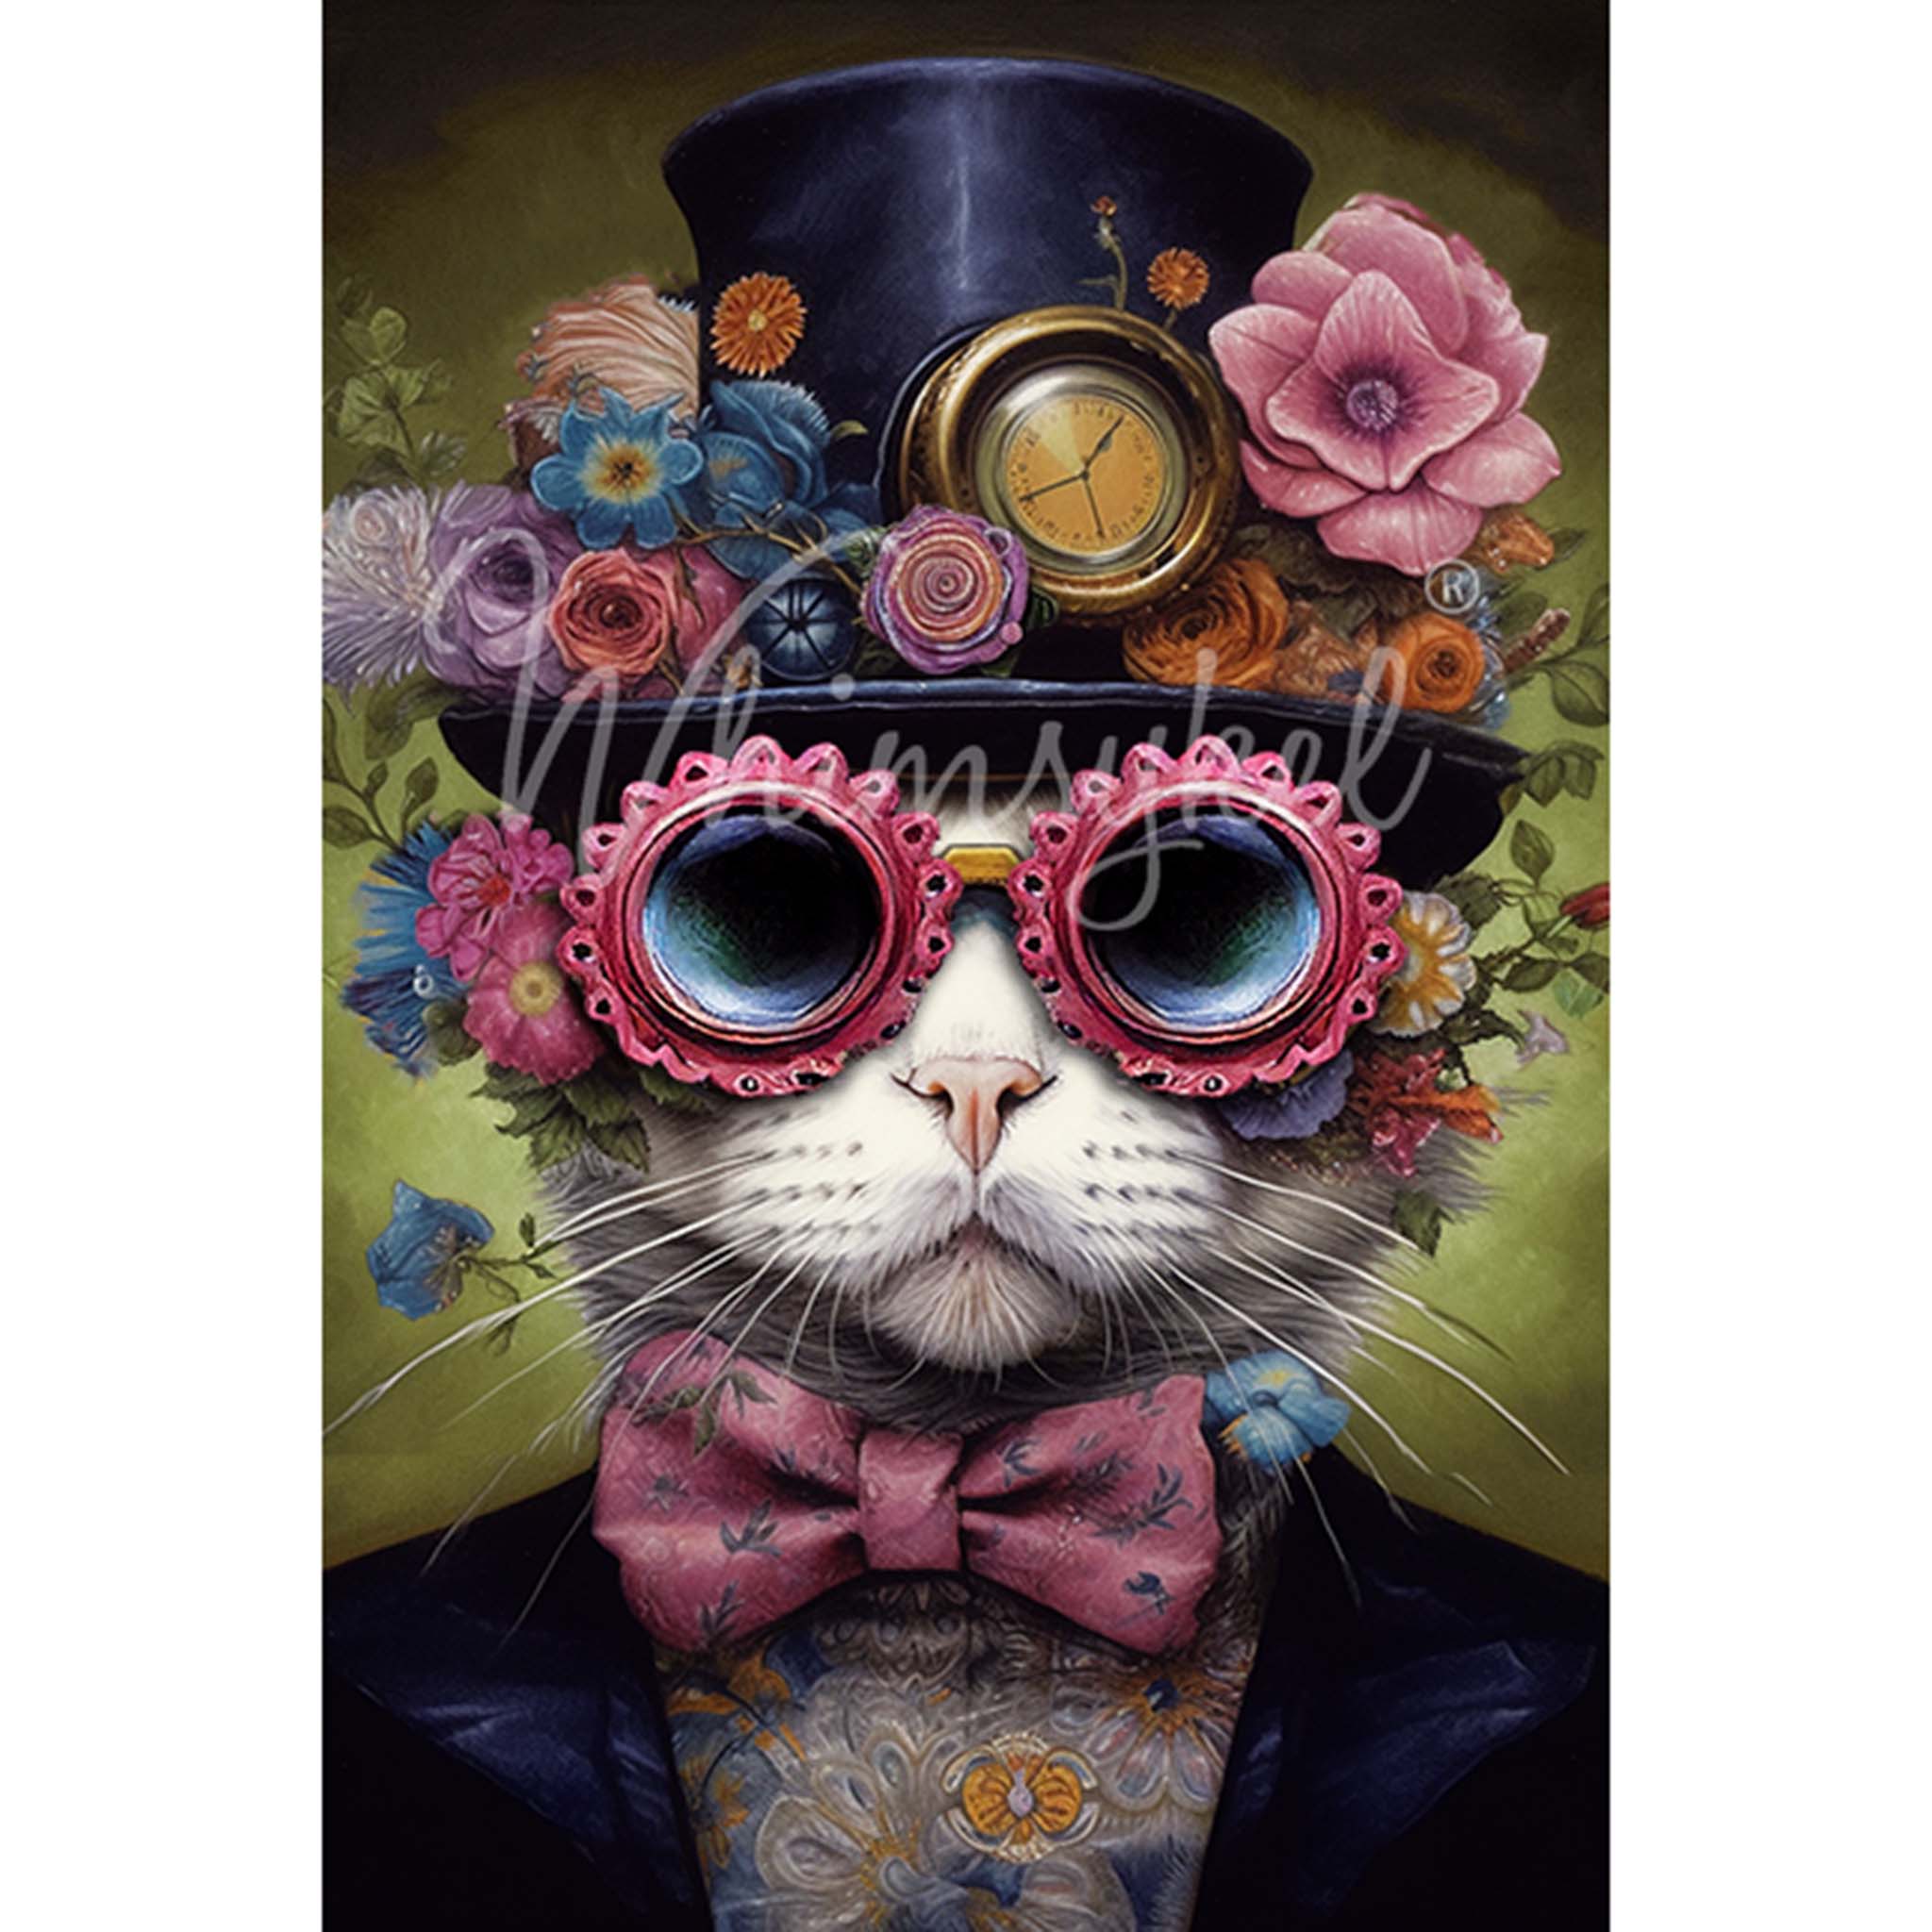 Tissue paper design of a whimsical artwork featuring a charming cat donning a top hat and sunglasses amidst a vibrant garden of flowers. White border are on the sides.